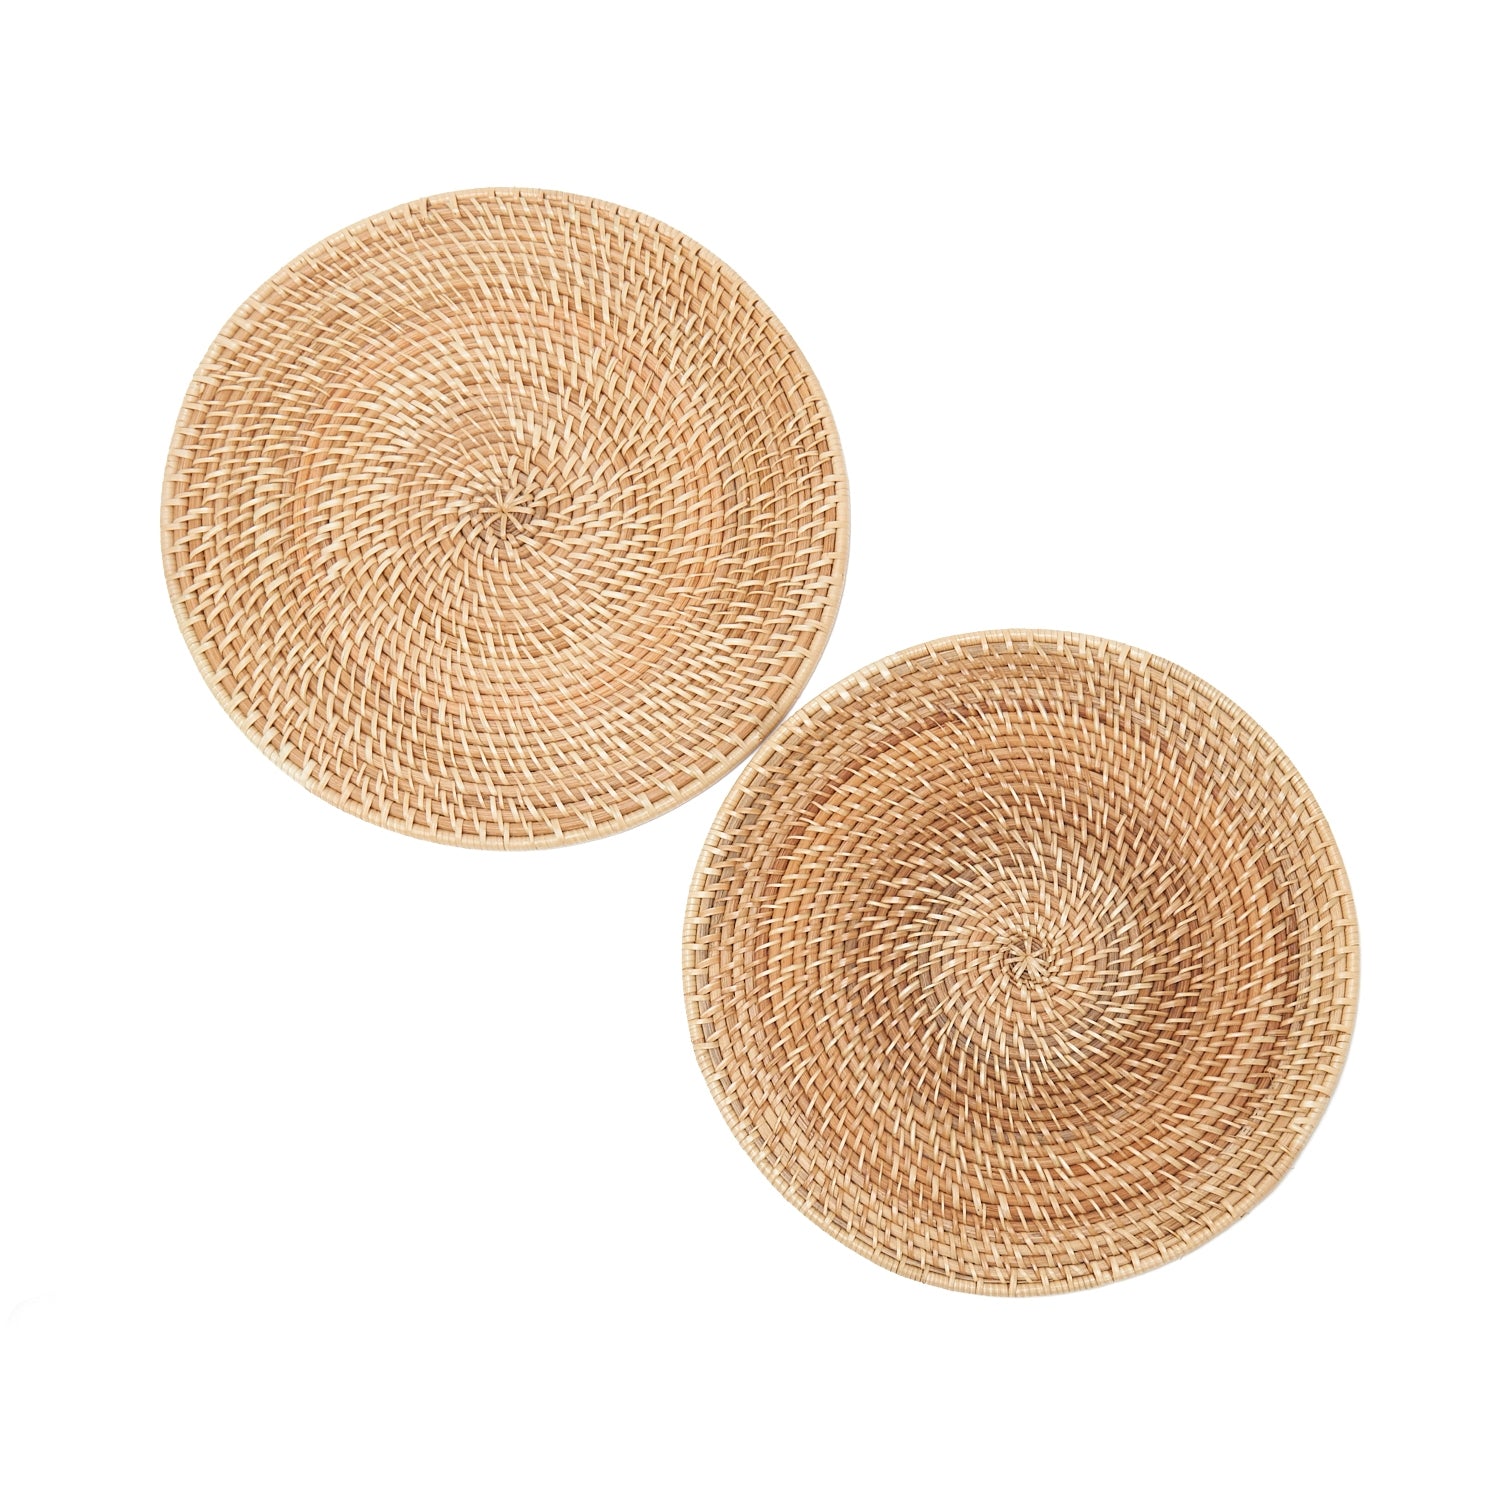 Woven Rattan Placemats, Set of 2-Nautical Decor and Gifts